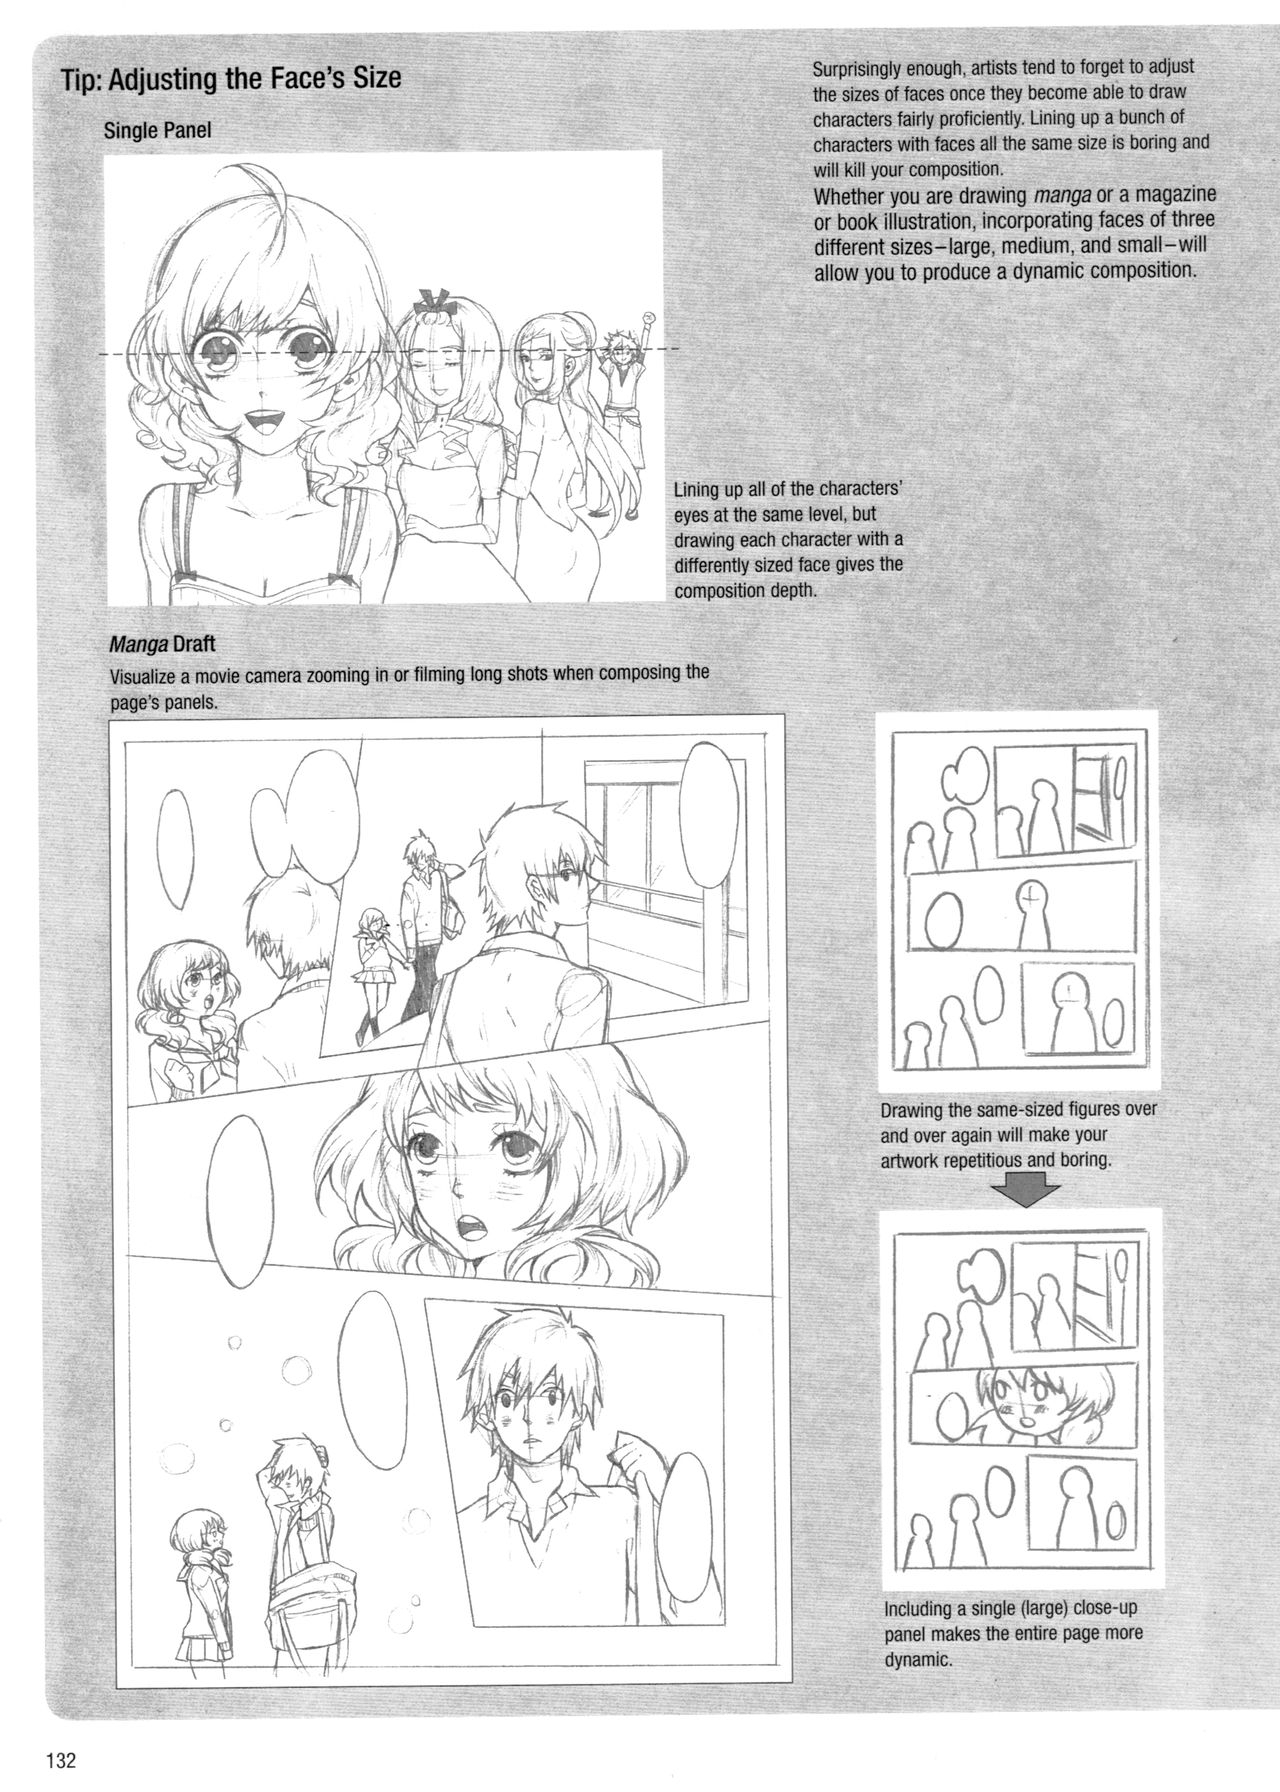 Sketching Manga-Style Vol. 3 - Unforgettable Characters 131